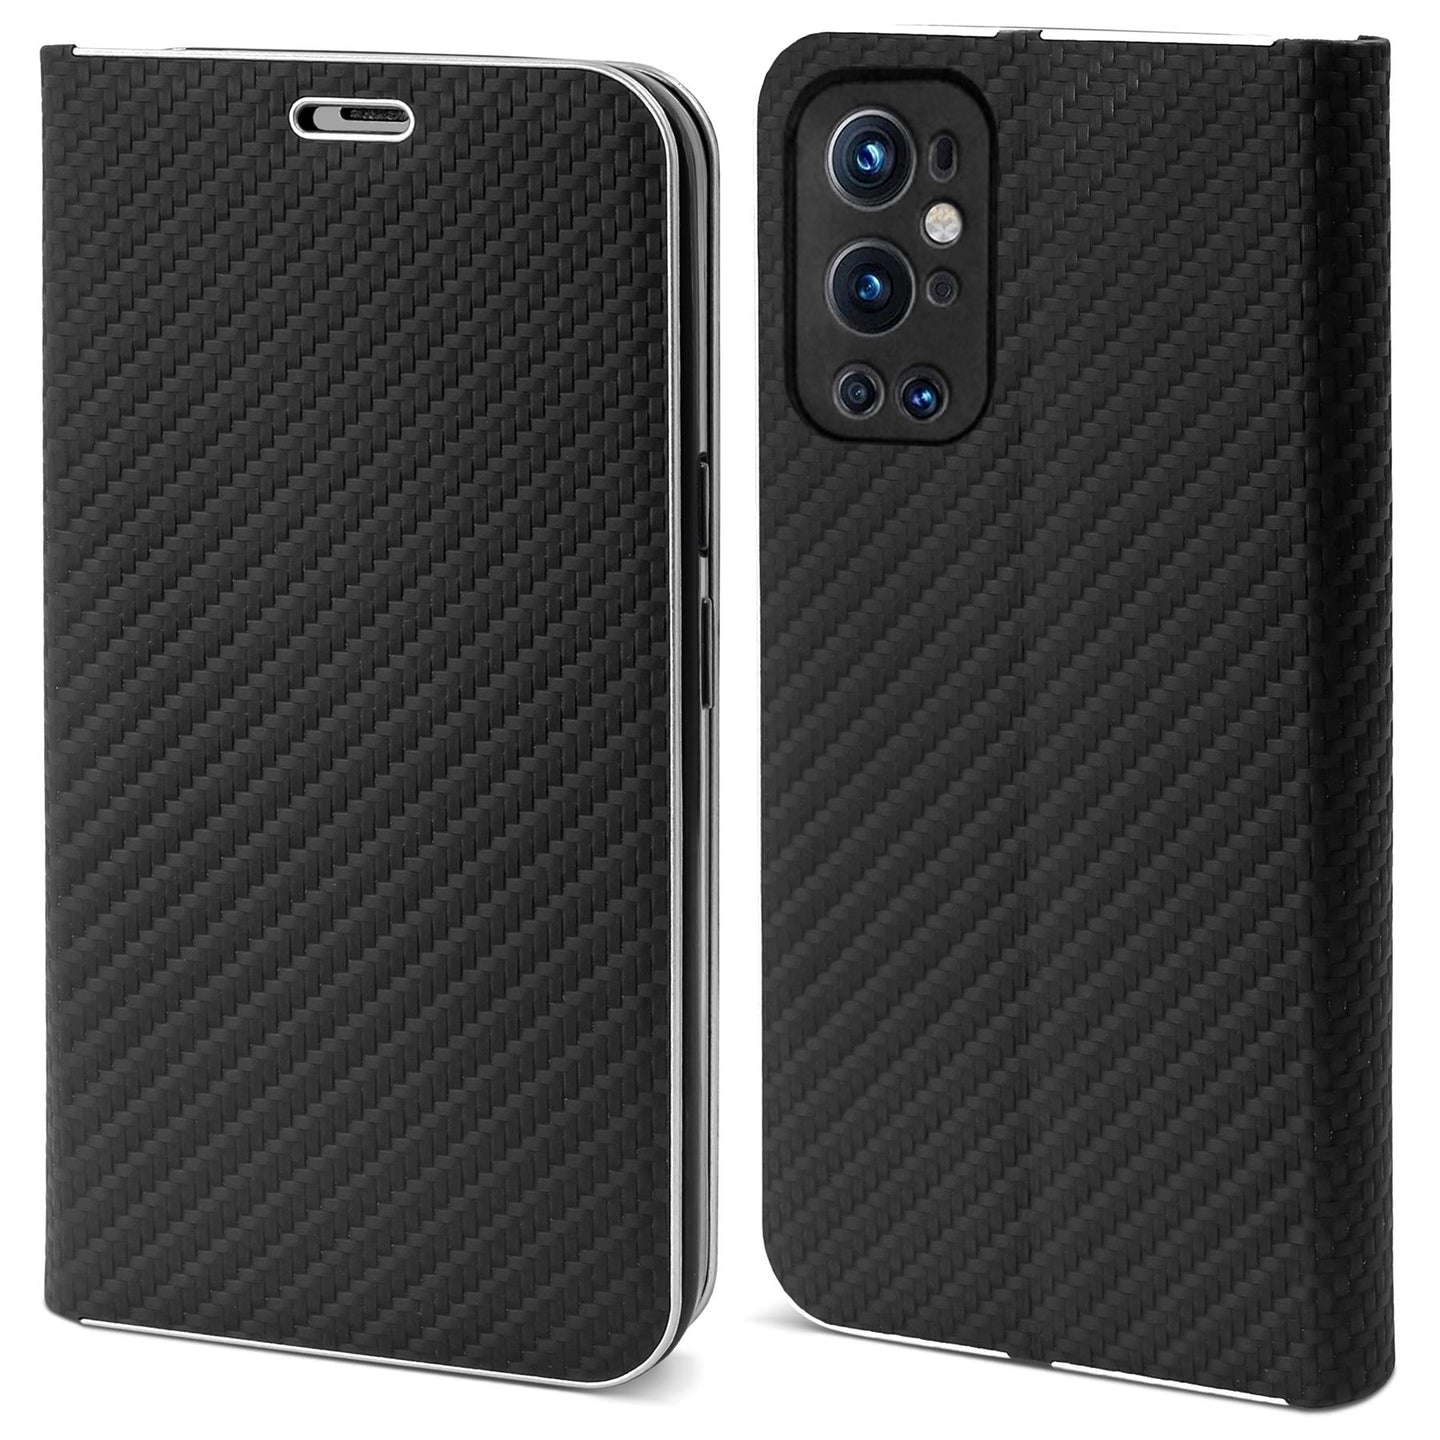 Moozy Wallet Case for OnePlus 9 Pro, Black Carbon - Flip Case with Metallic Border Design Magnetic Closure Flip Cover with Card Holder and Kickstand Function